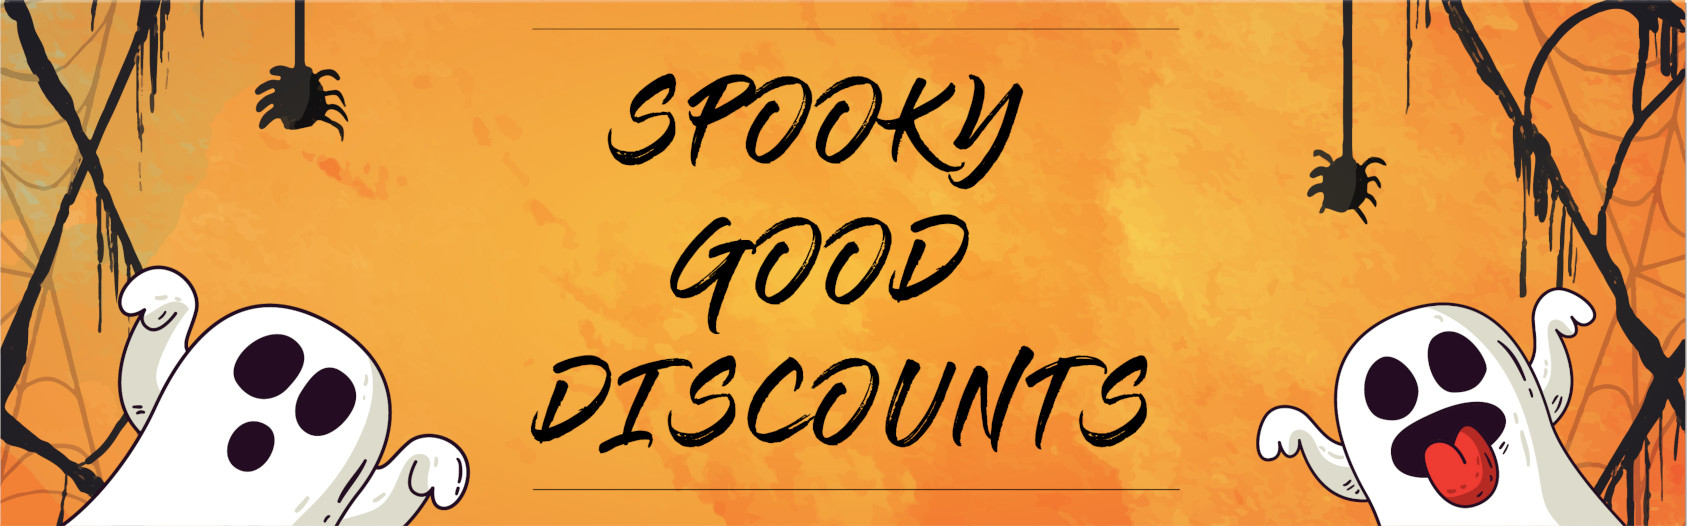 SPOOKY GOOD DISCOUNTS AT INFO & TICKET CENTER Banner